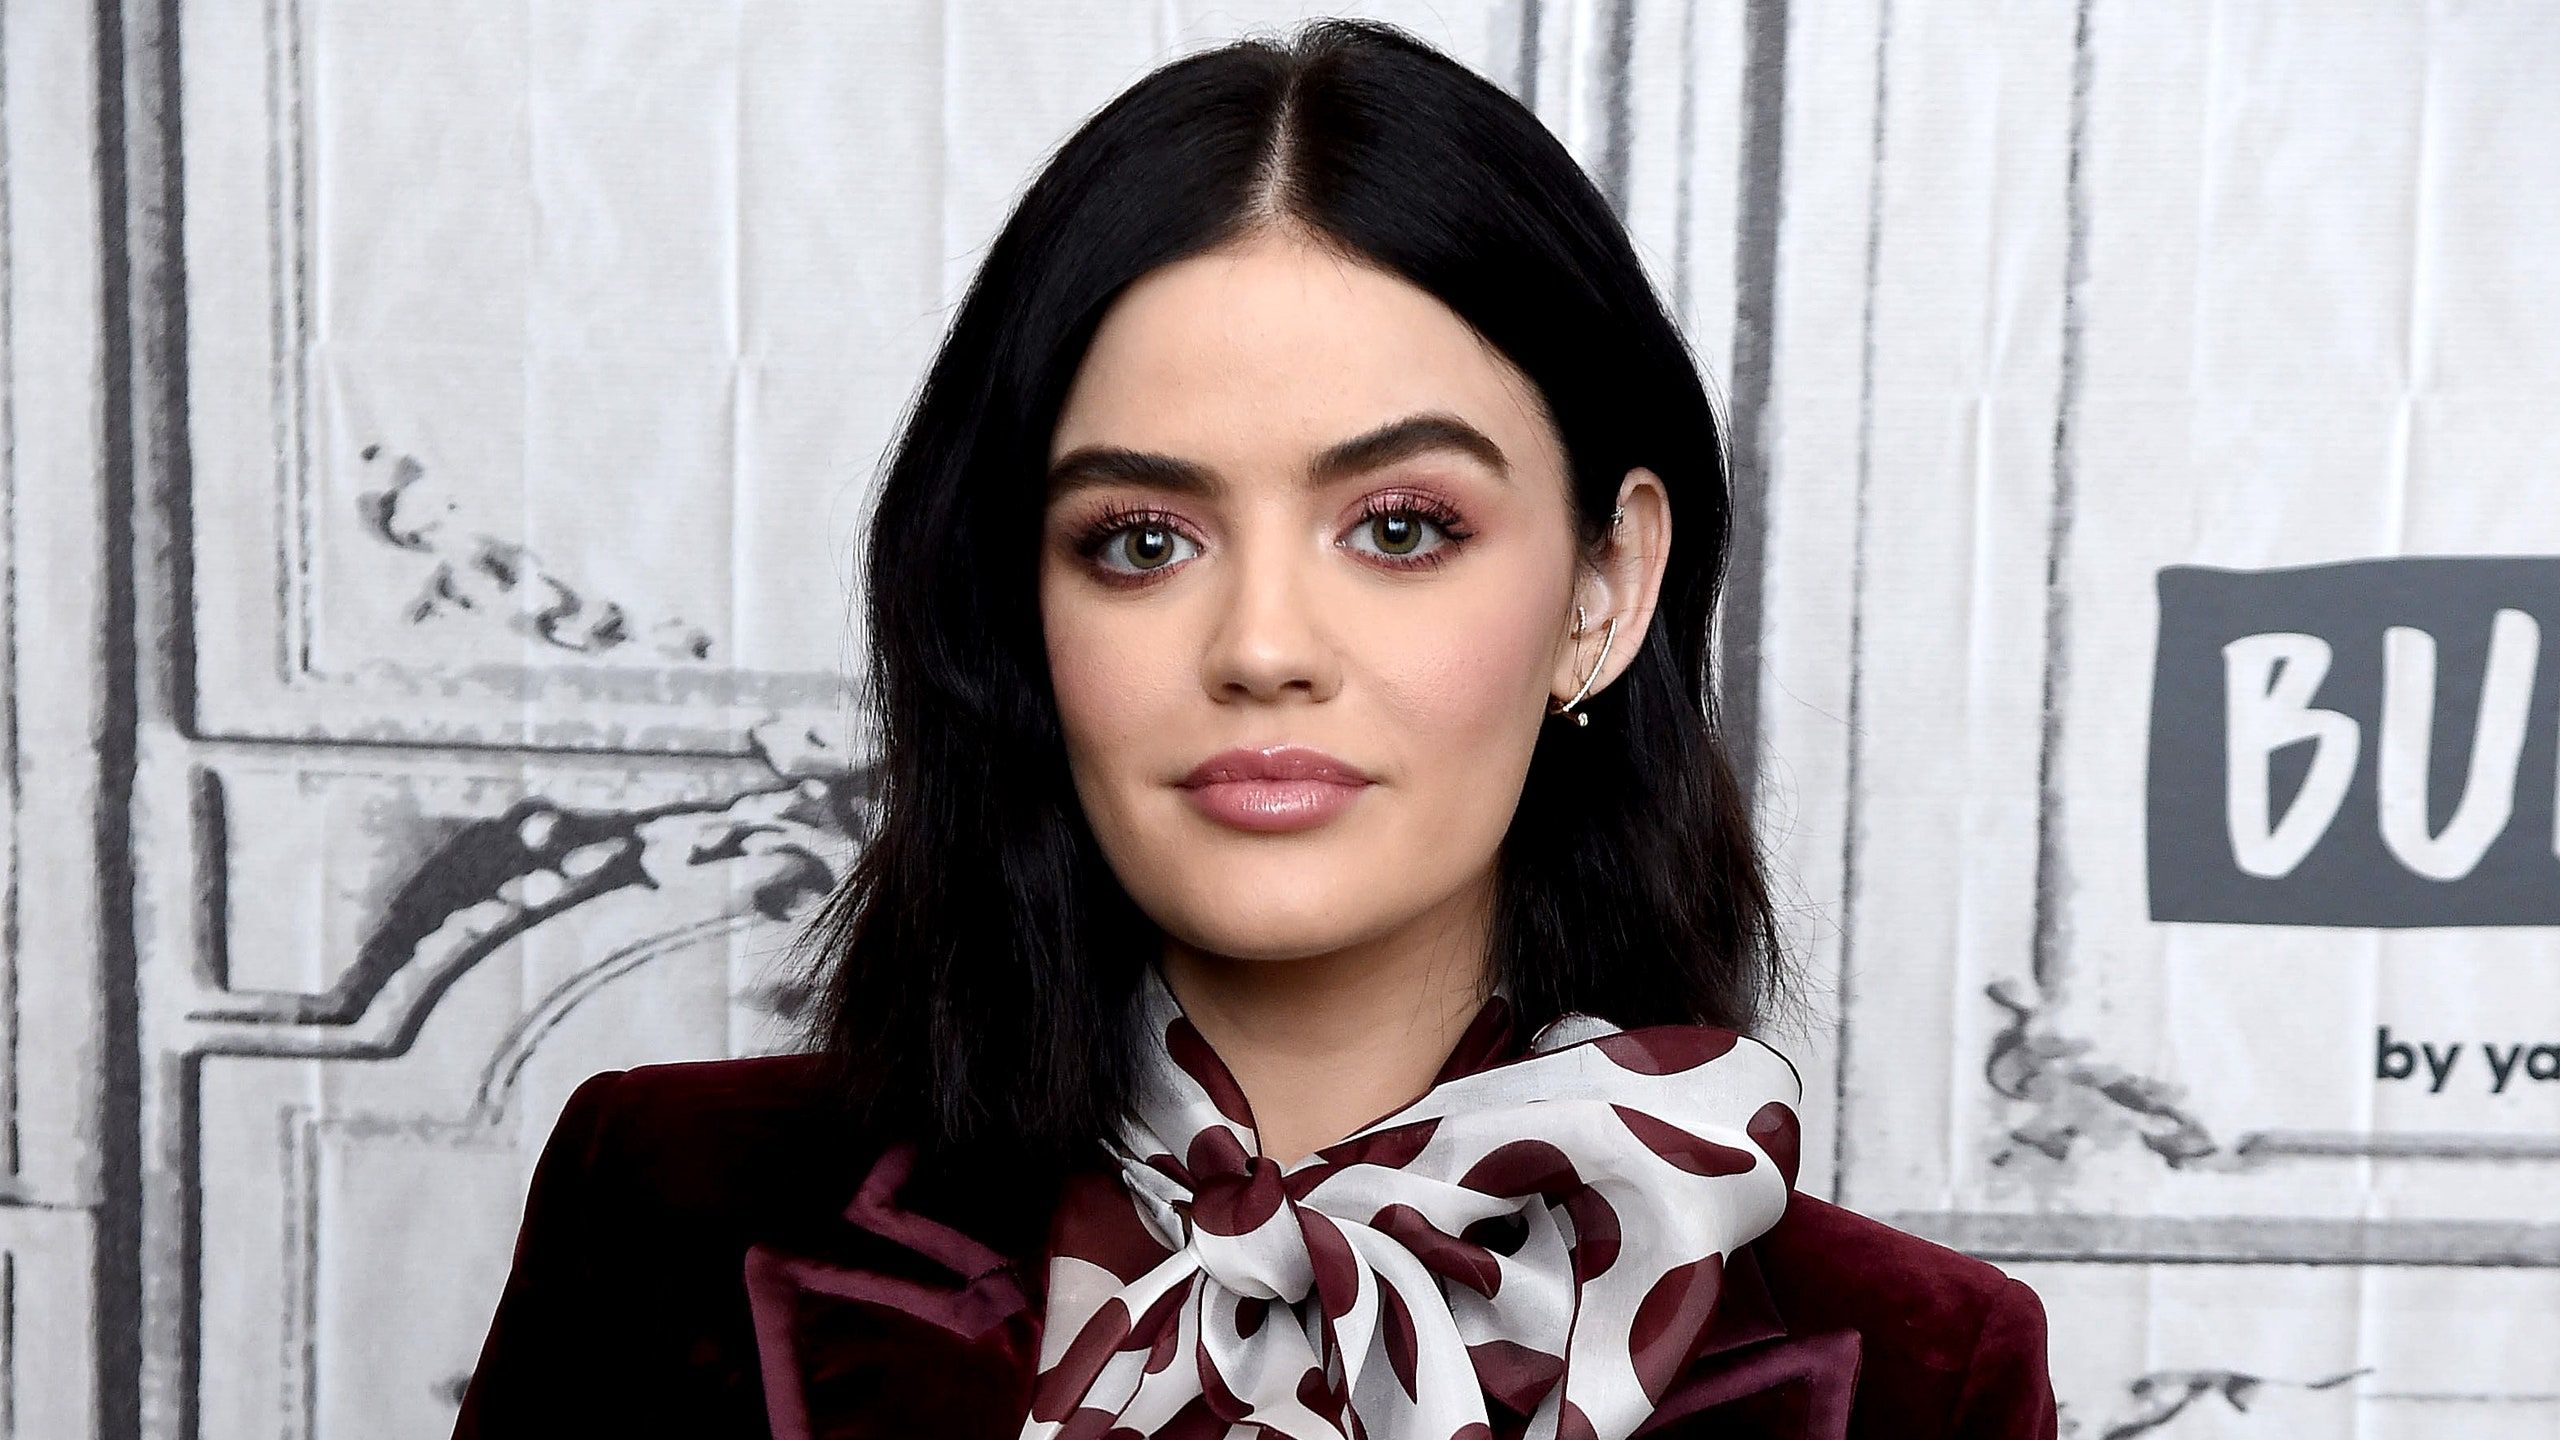 Lucy Hale Revealed Photo From When She Had Pencil Thin Eyebrows In High School